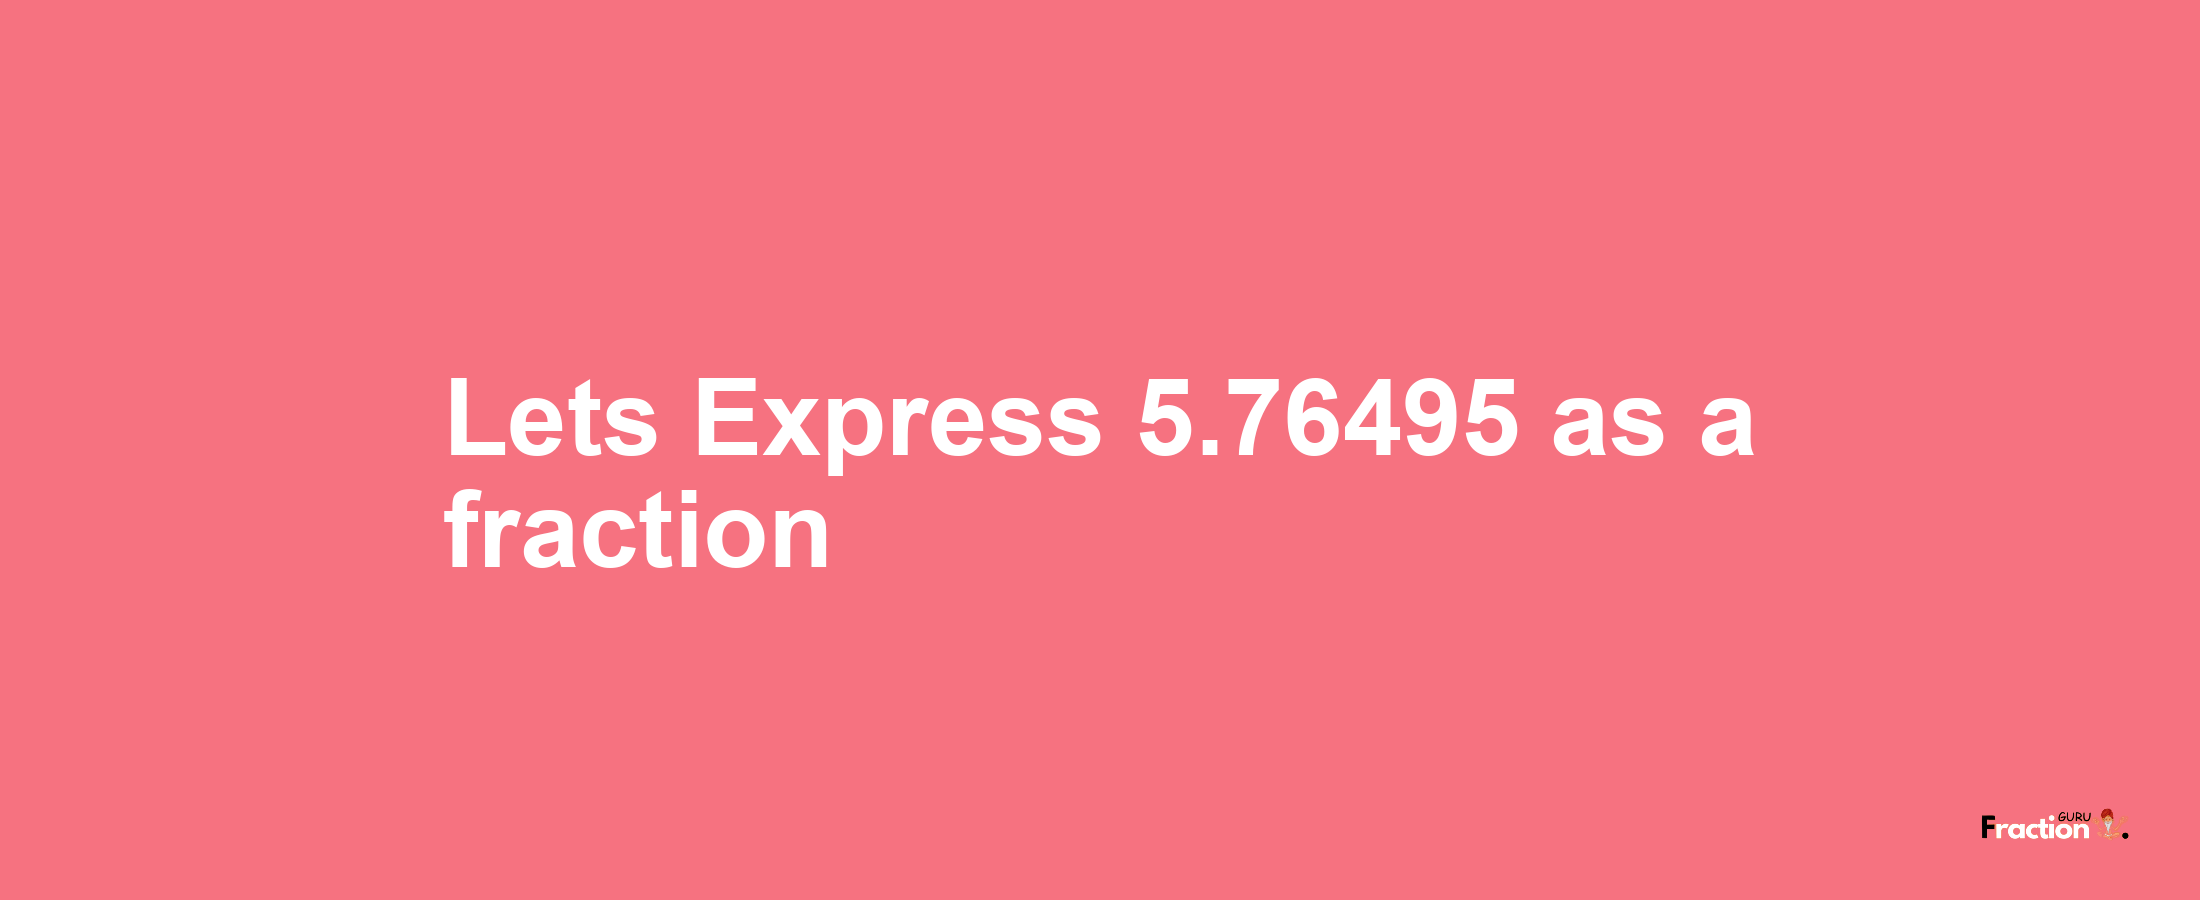 Lets Express 5.76495 as afraction